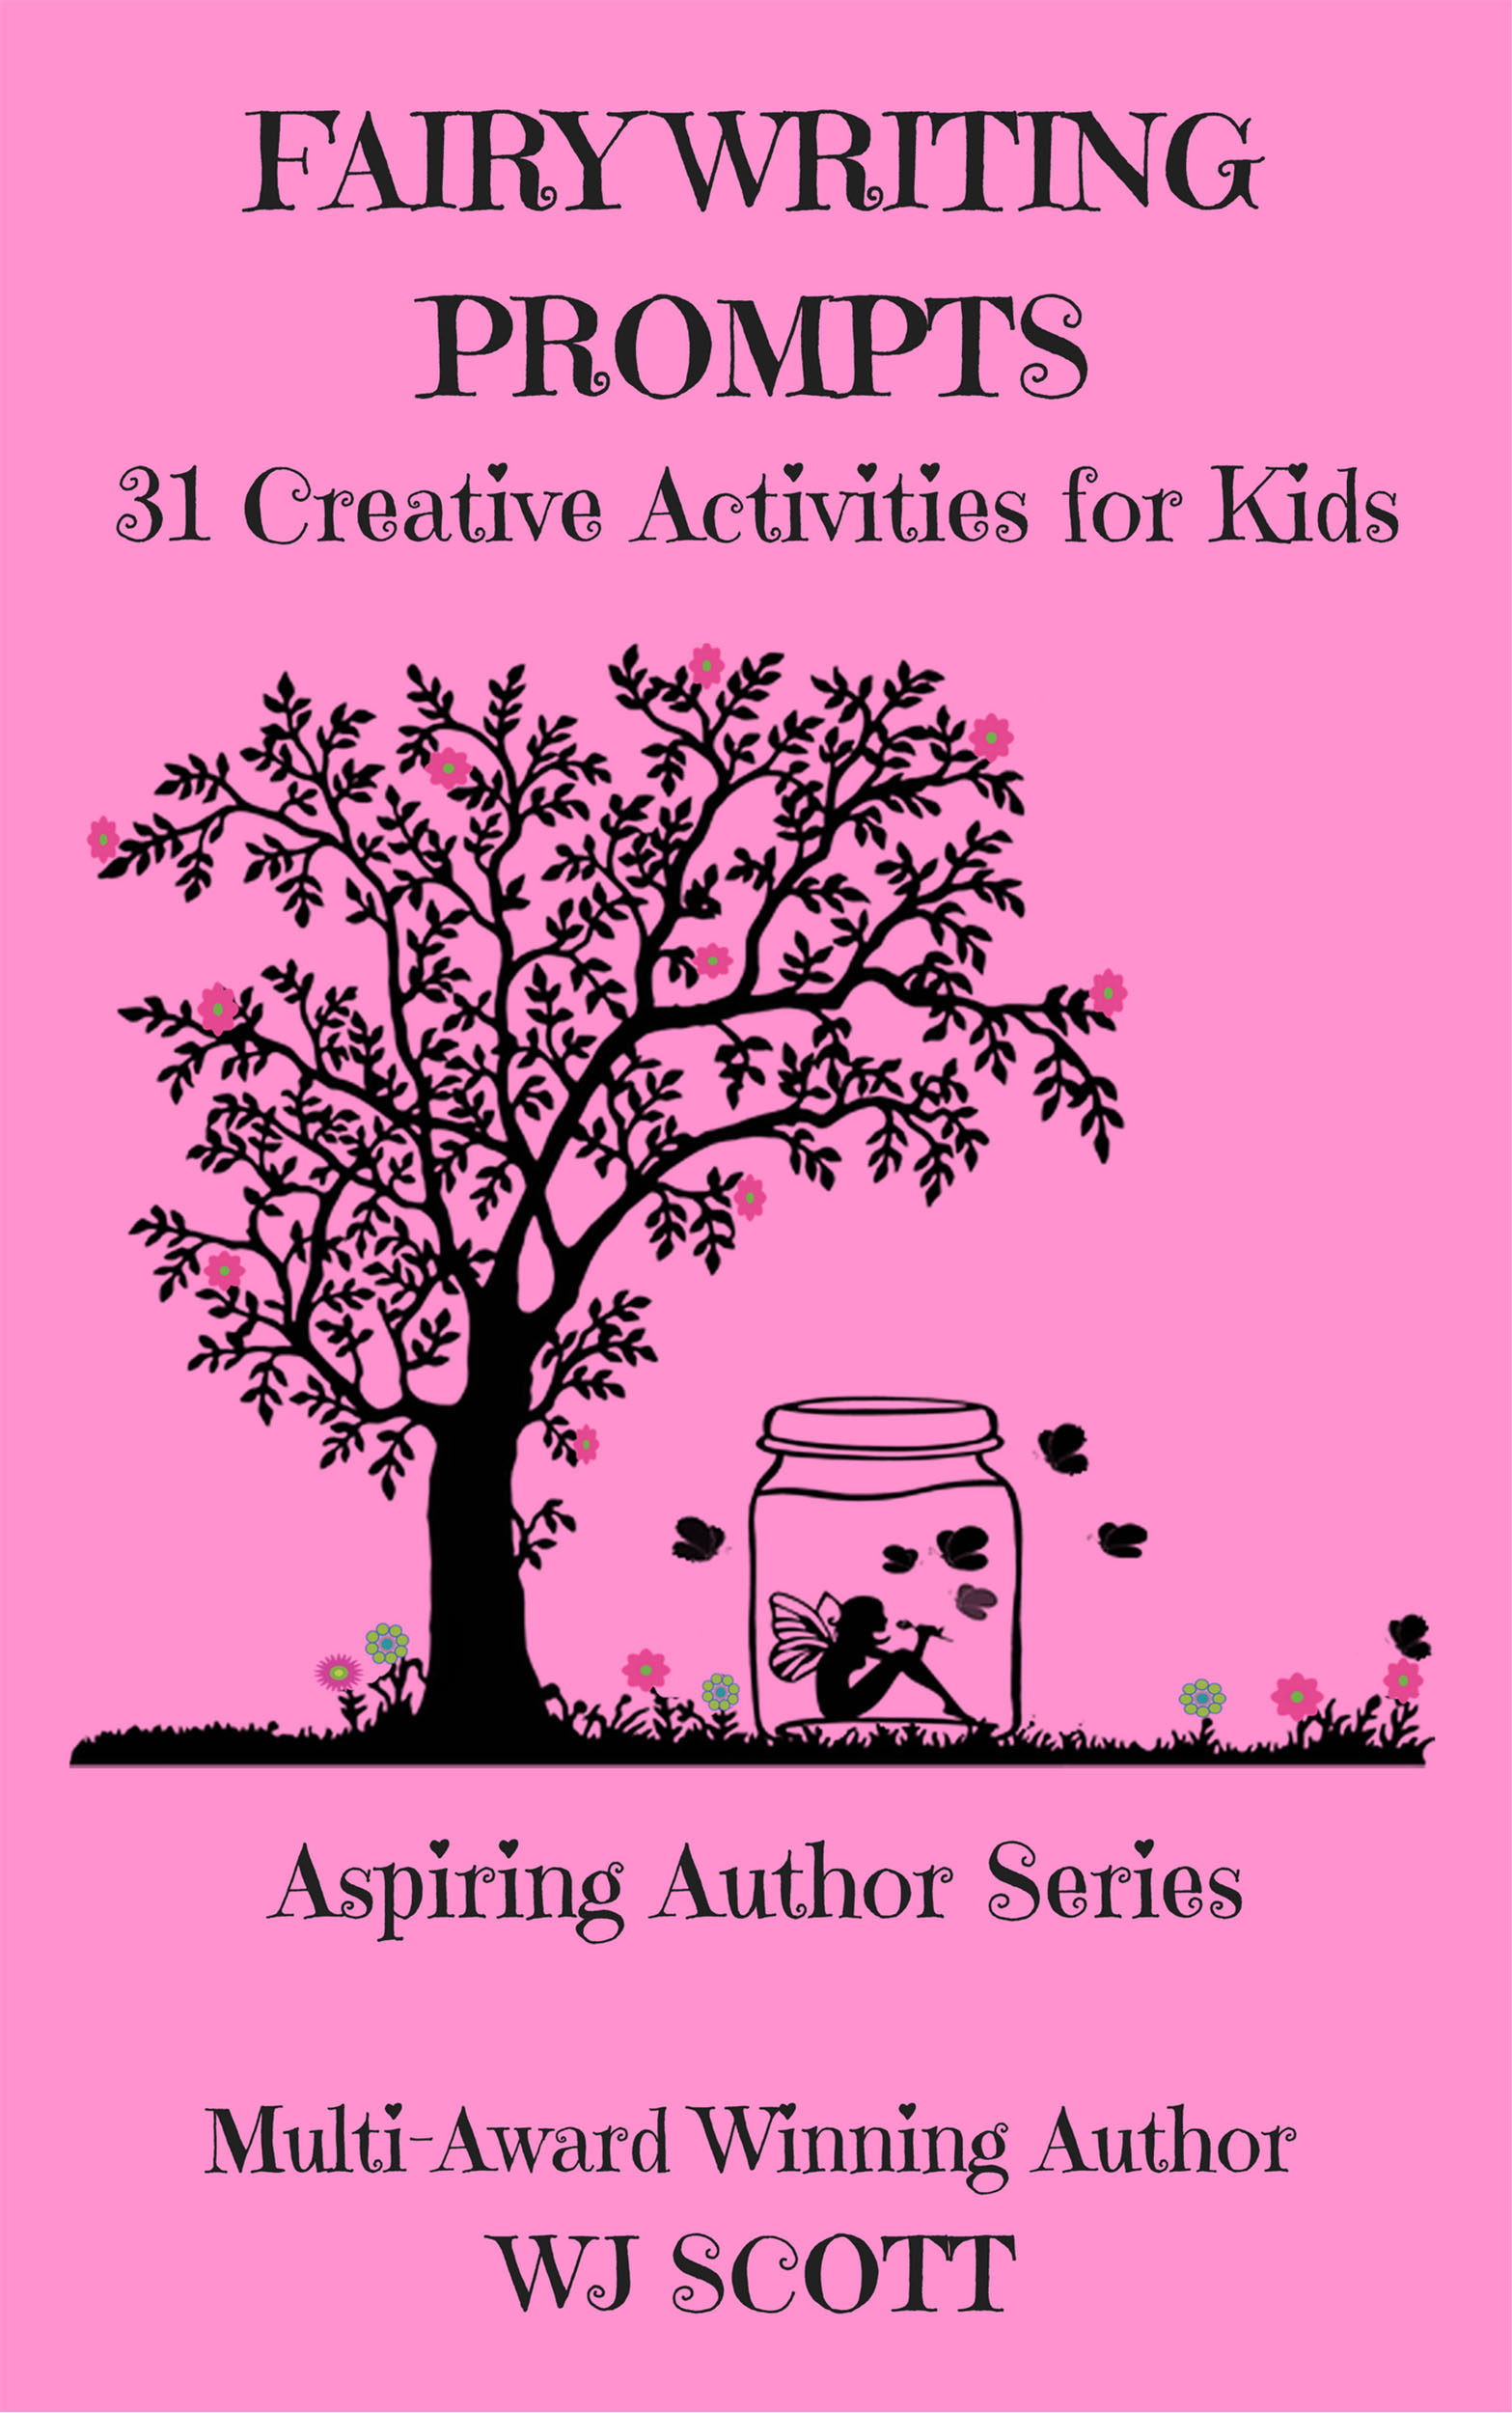 FREE: Fairy Writing Prompts, 31 Creative Activities for Kids by WJ Scott